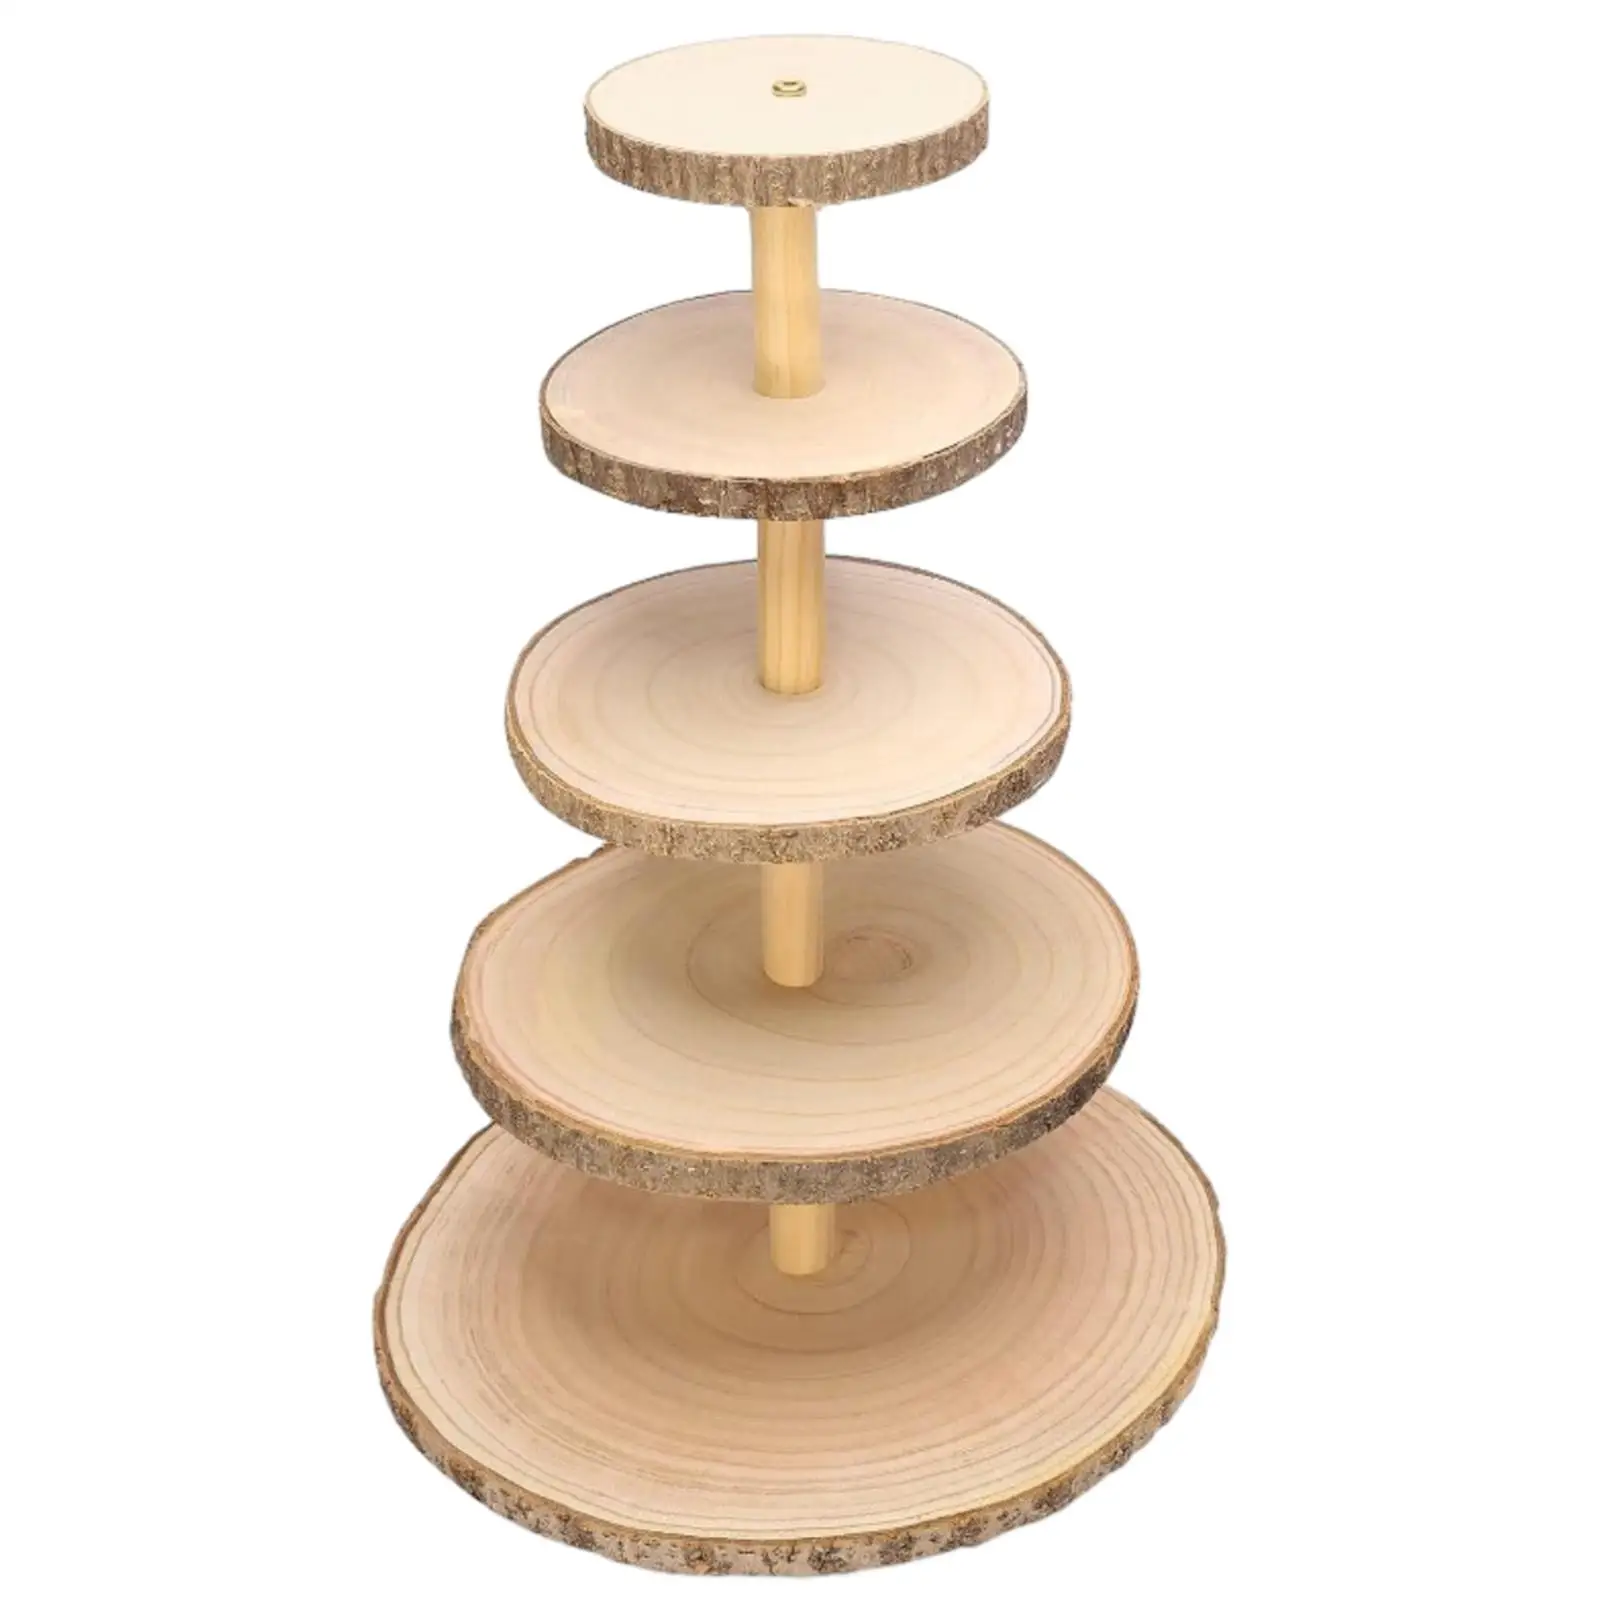 Wood Cupcake Stand Rustic Wood Cake Stand Dessert Display Stand Four Tiered for Table Centerpiece Parties Home Birthday Decor